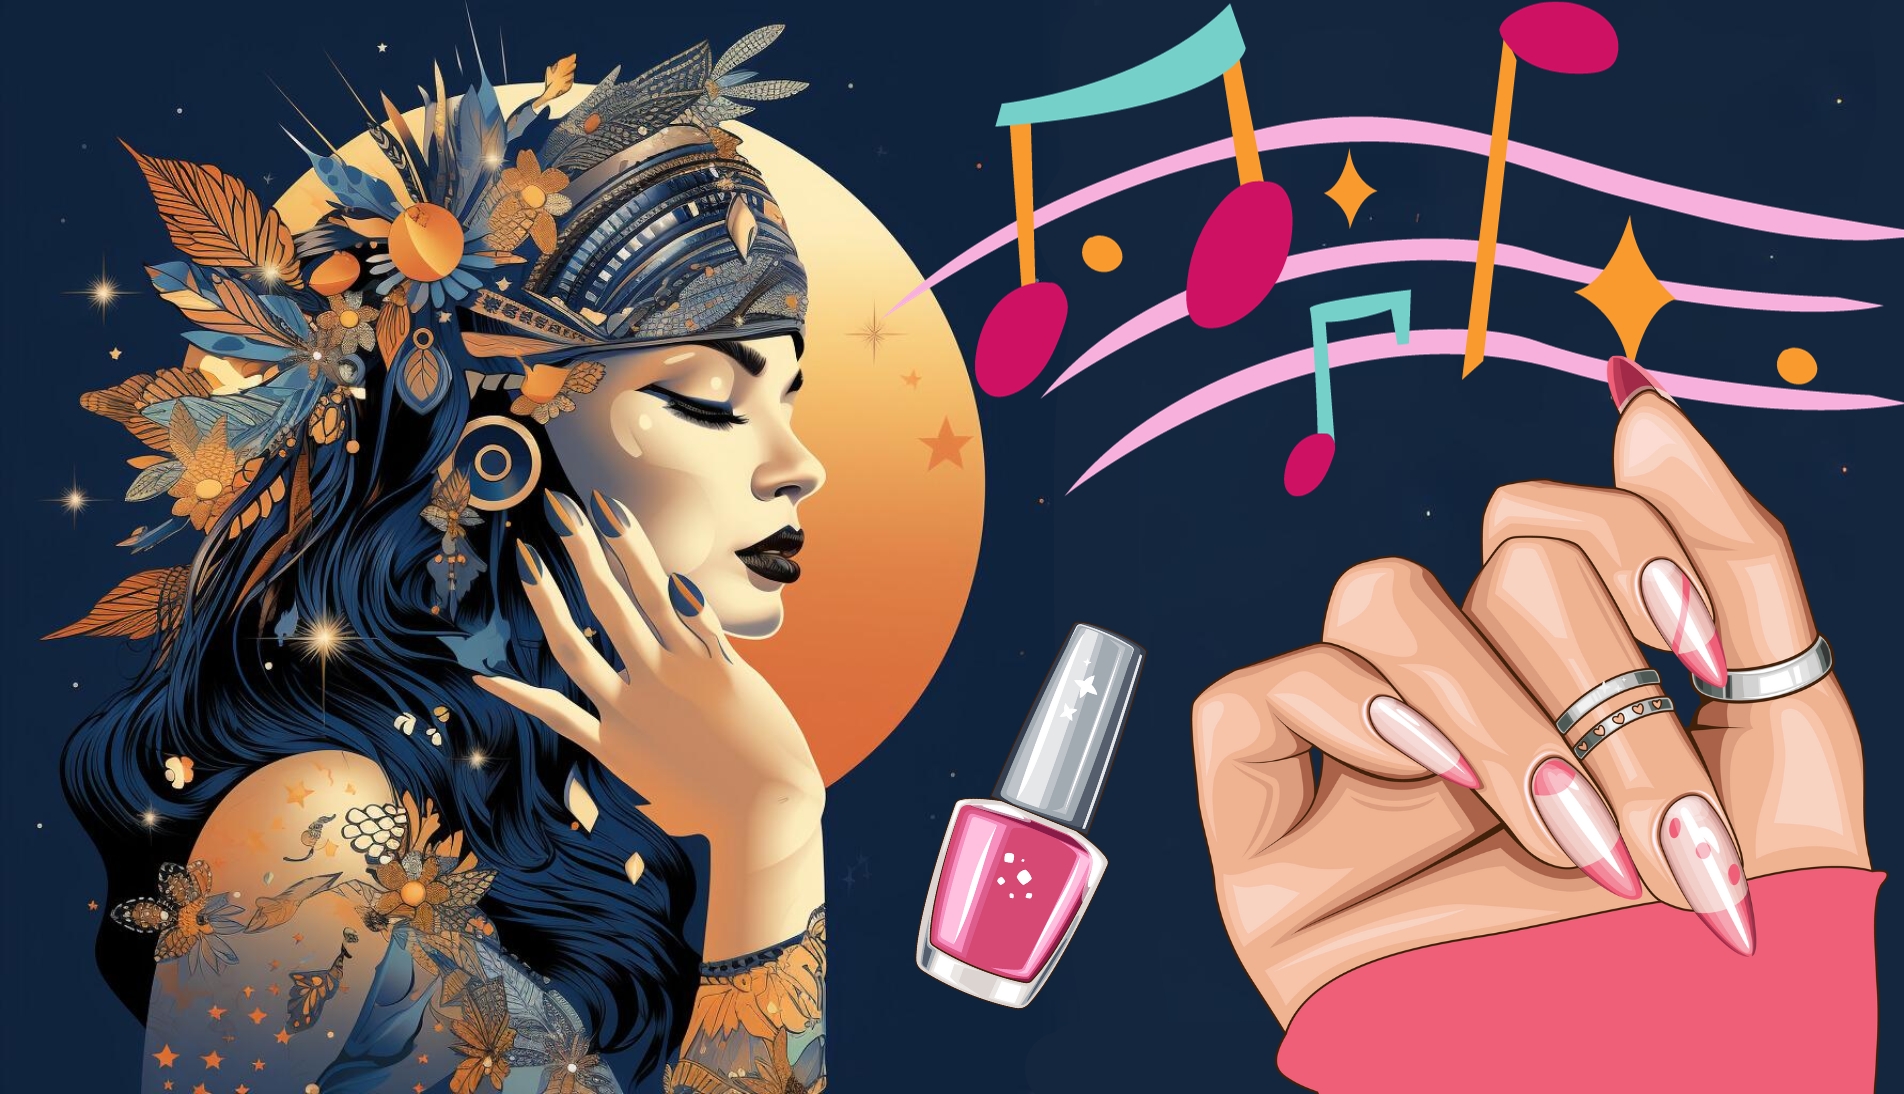 Illustration showcasing vibrant and creative nail art designs perfect for music festivals.